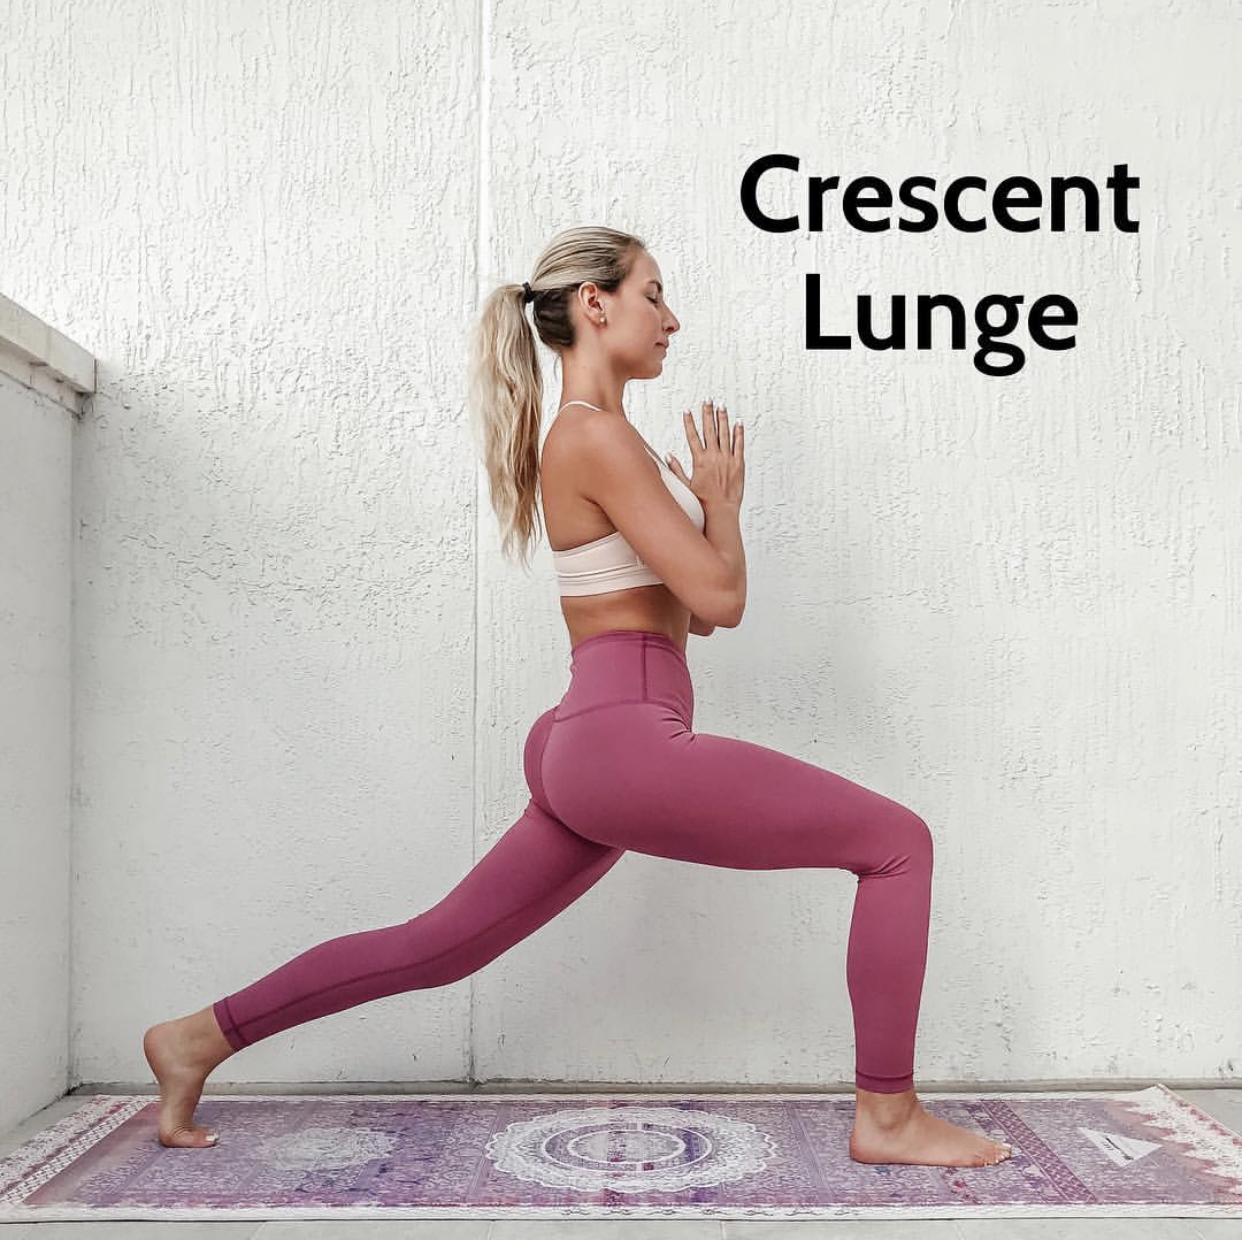  Crescent Lunge x 1 minute on each leg. Make sure to press into the ball of the back foot and gently pulse the front knee for a deeper stretch. 